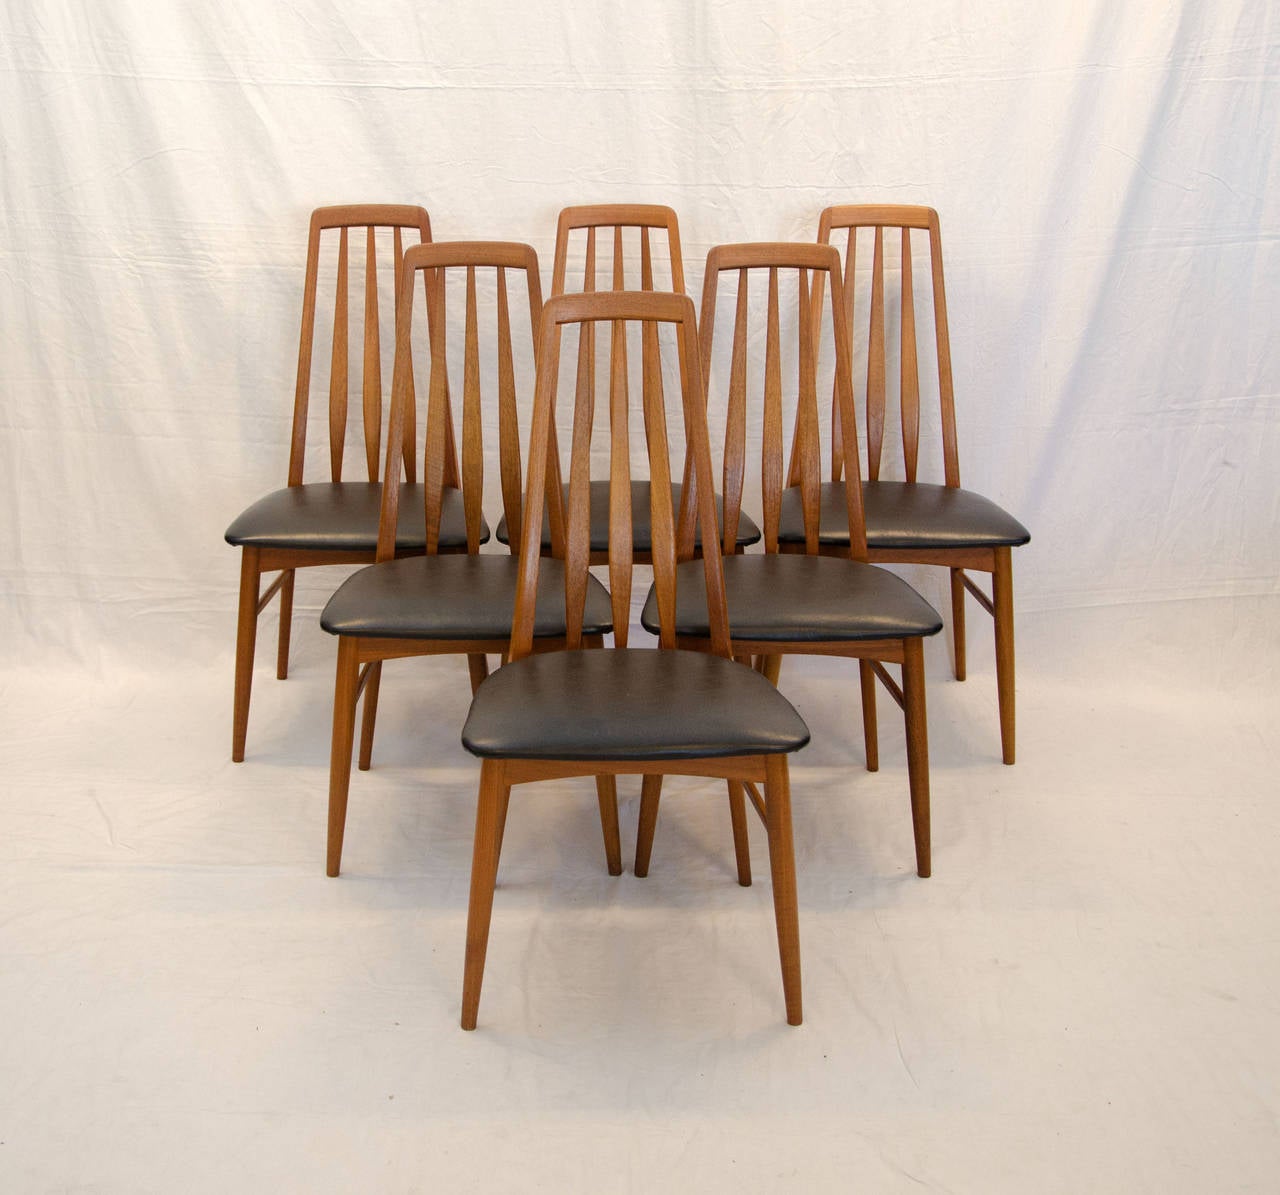 These very nice taller back dining chairs have just enough back to make them feel very comfortable. Named 